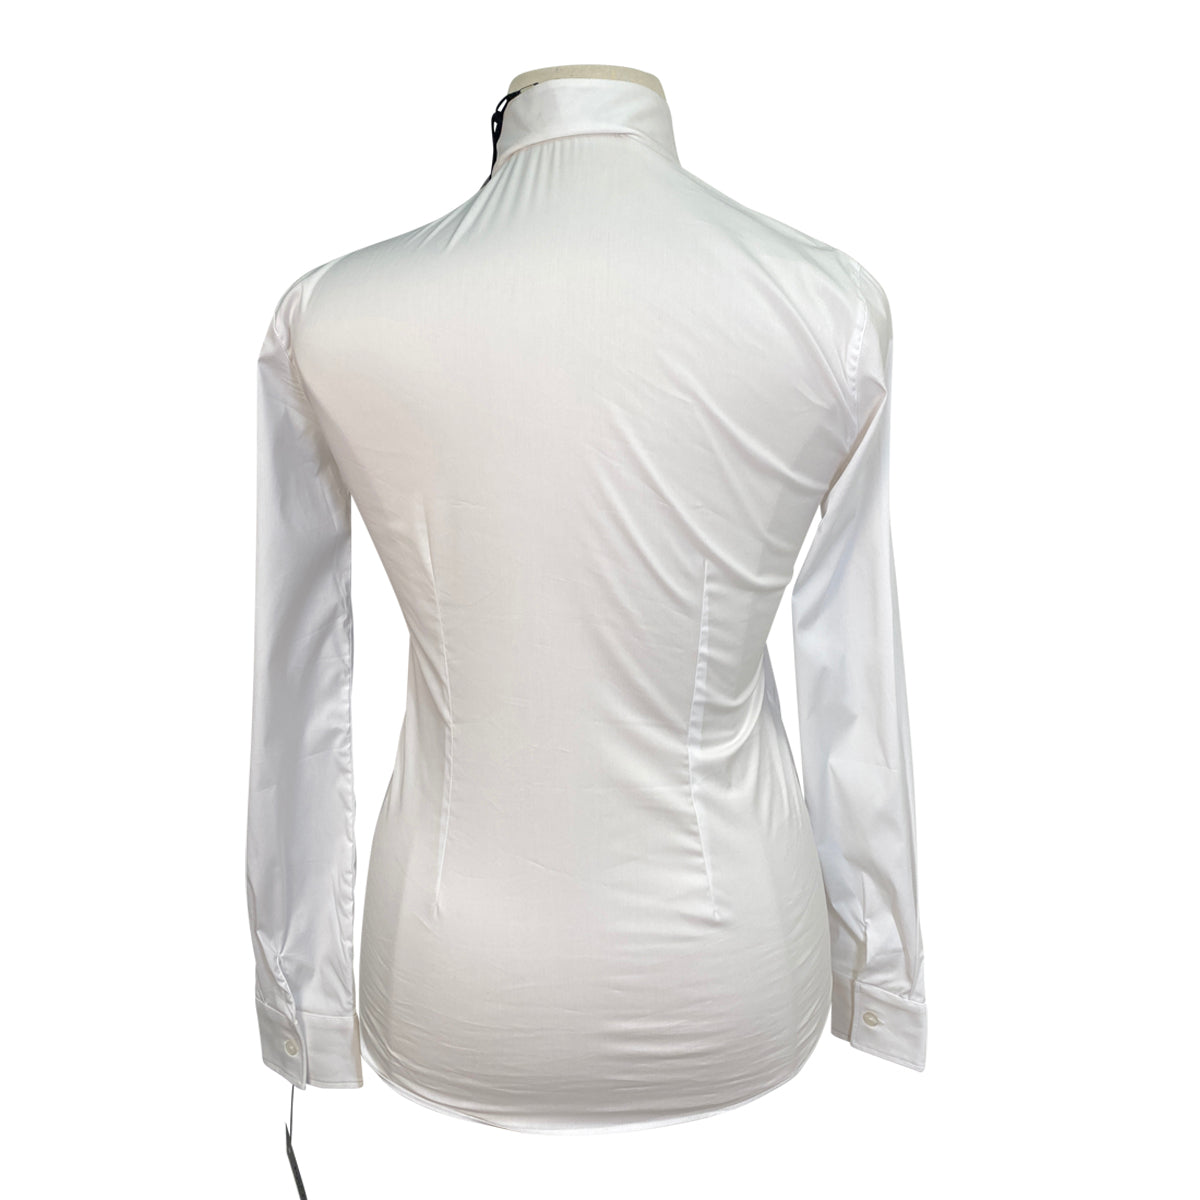 MaKeBe 'Grace' Competition Shirt in White